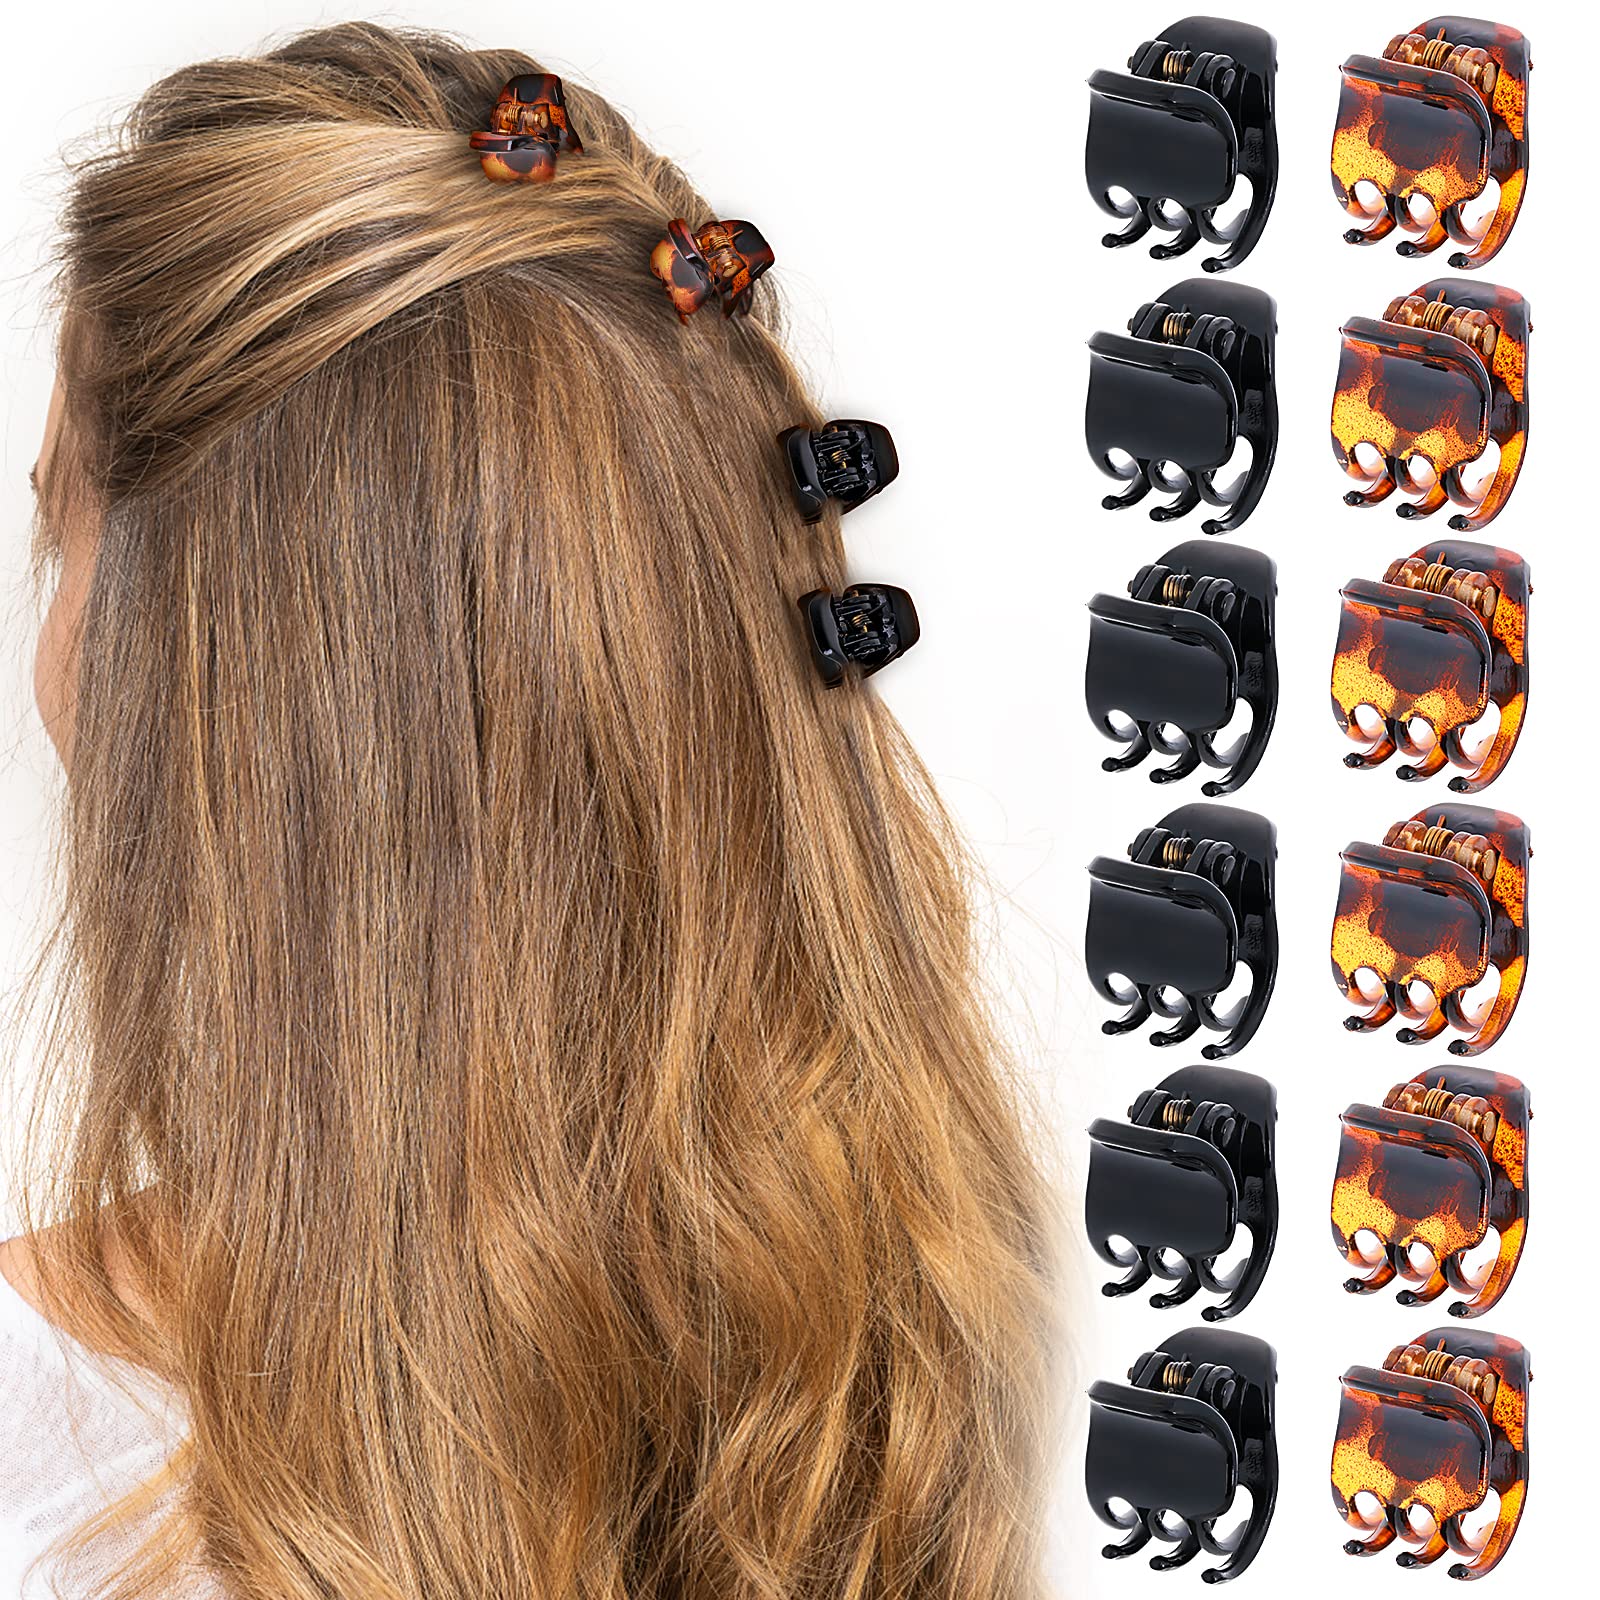 Cobahom 12 Pieces Mini Hair Clips Plastic Hair Claws for Hair Styling  Accessories Round Small Jaw Clamps for Women Girl's Hair (Brown)